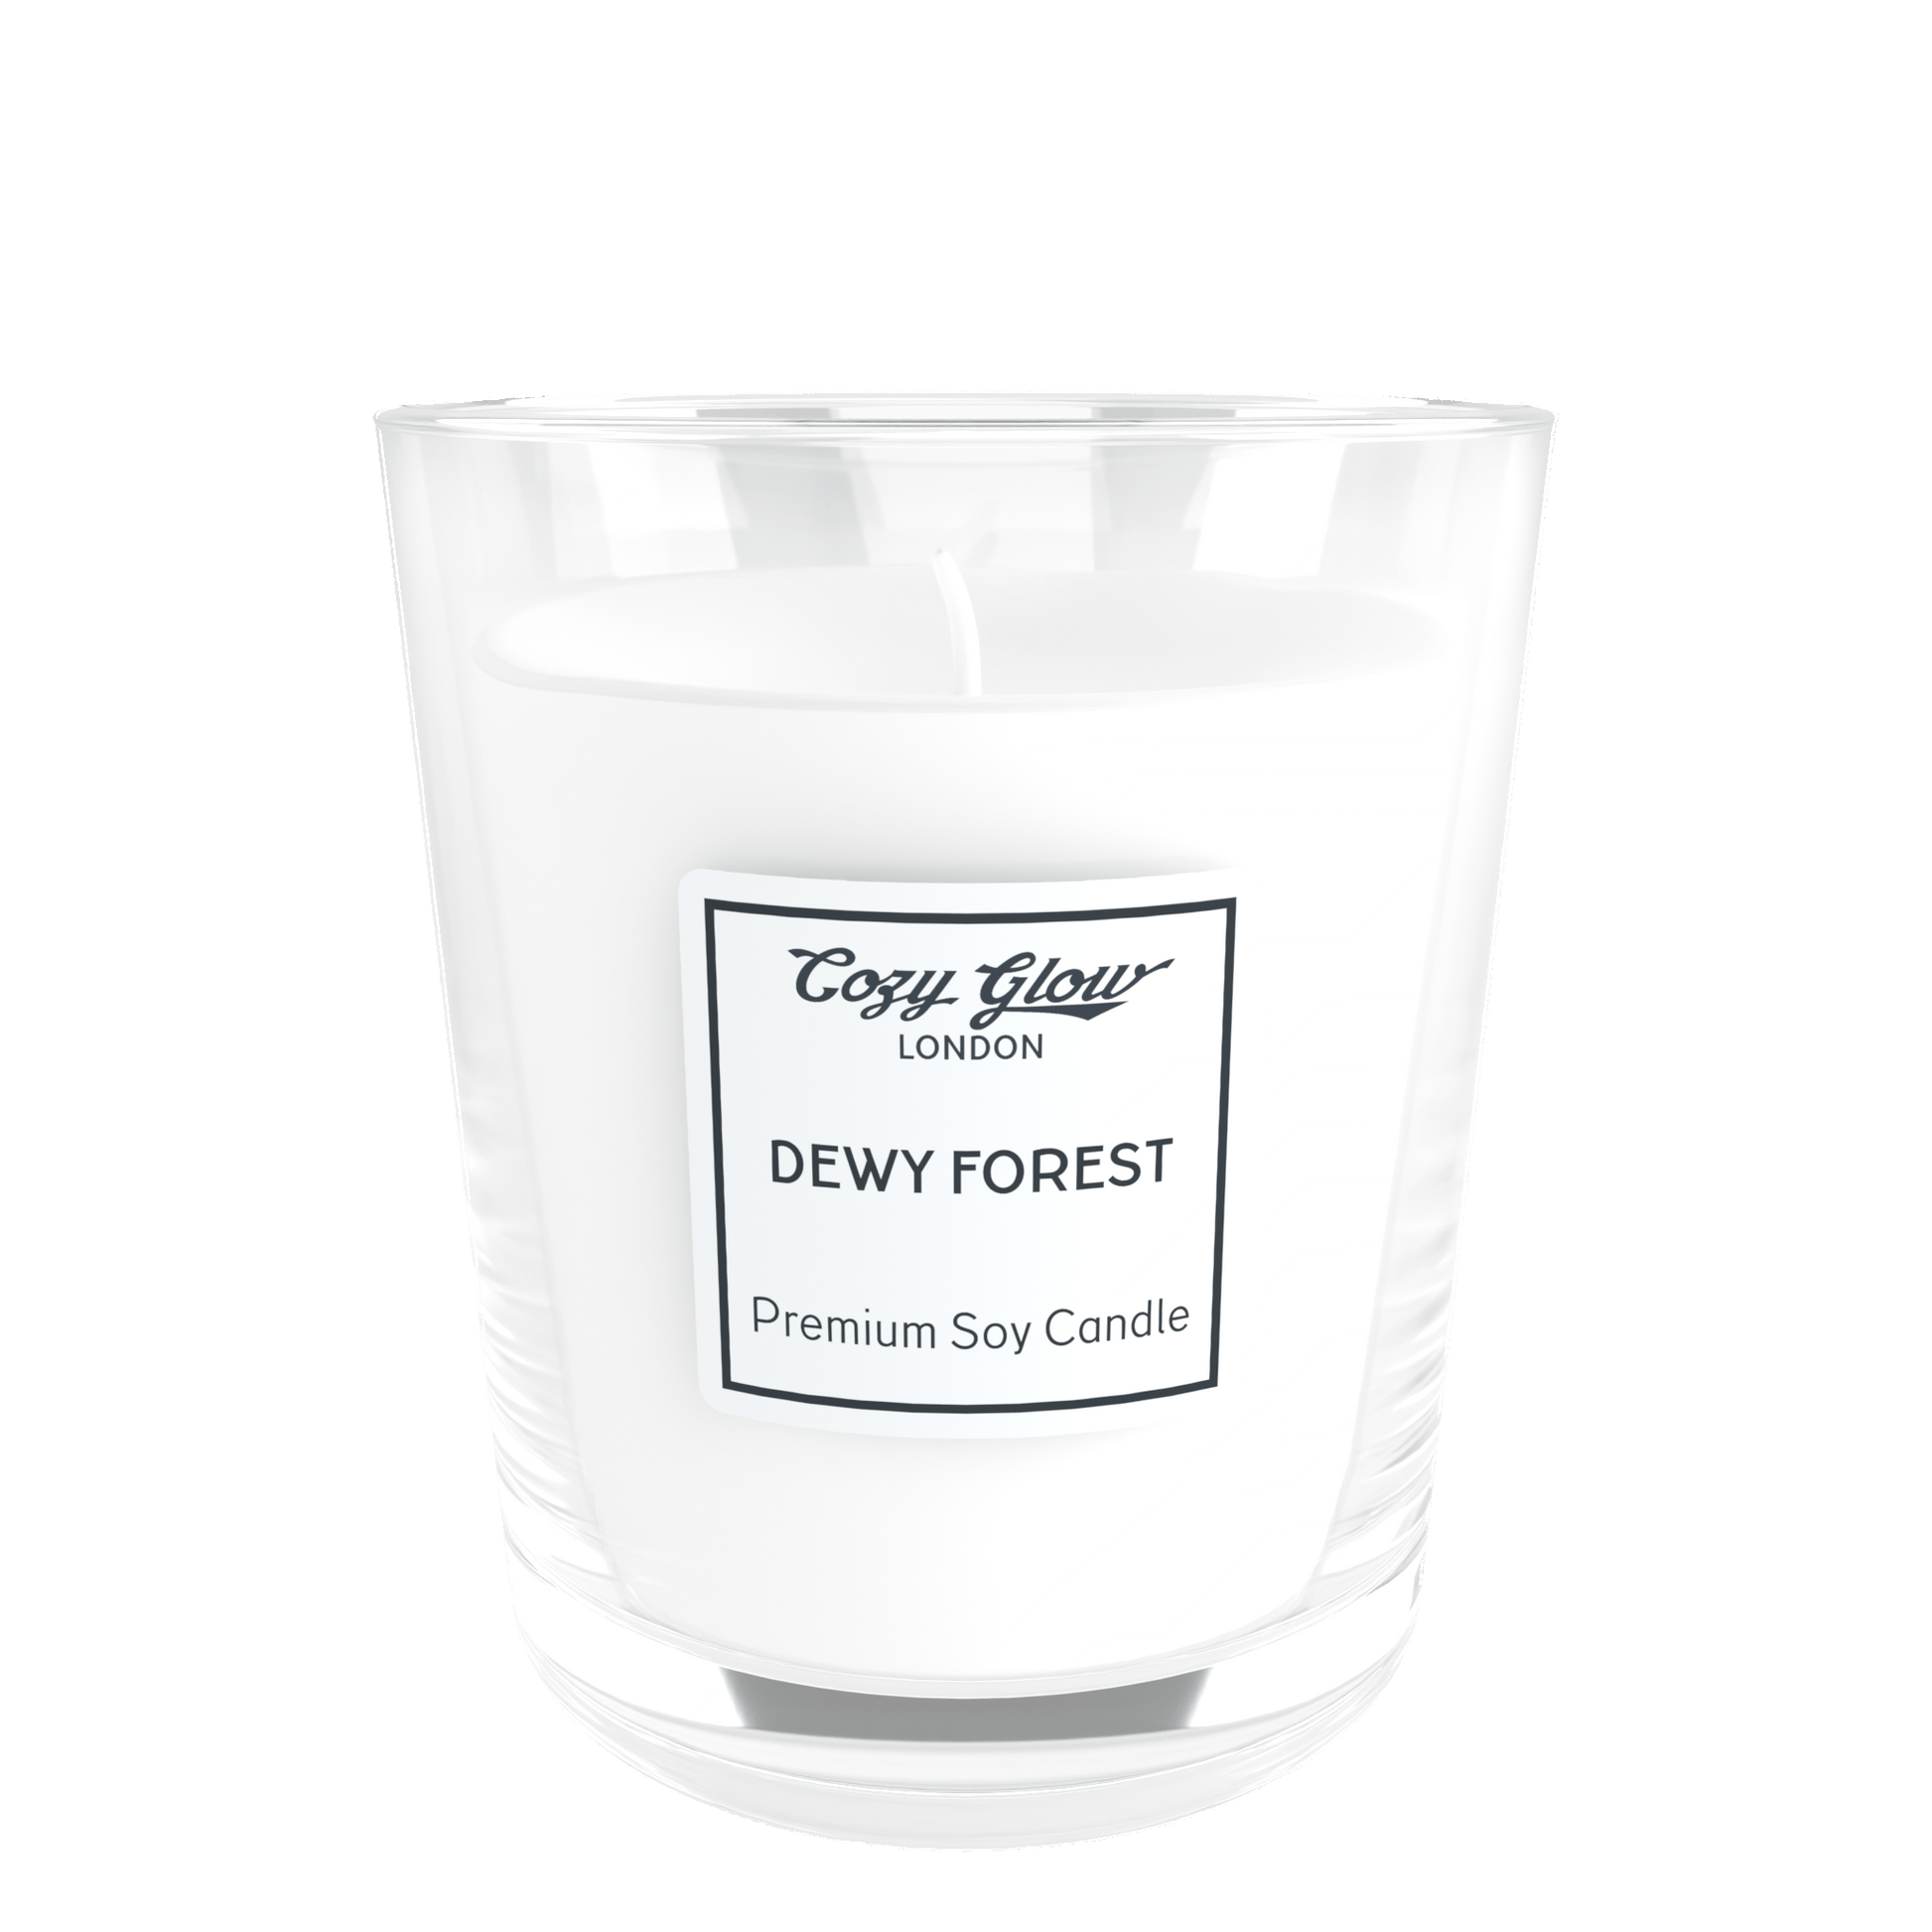 Cozy Glow Dewy Forest Premium Soy Candle